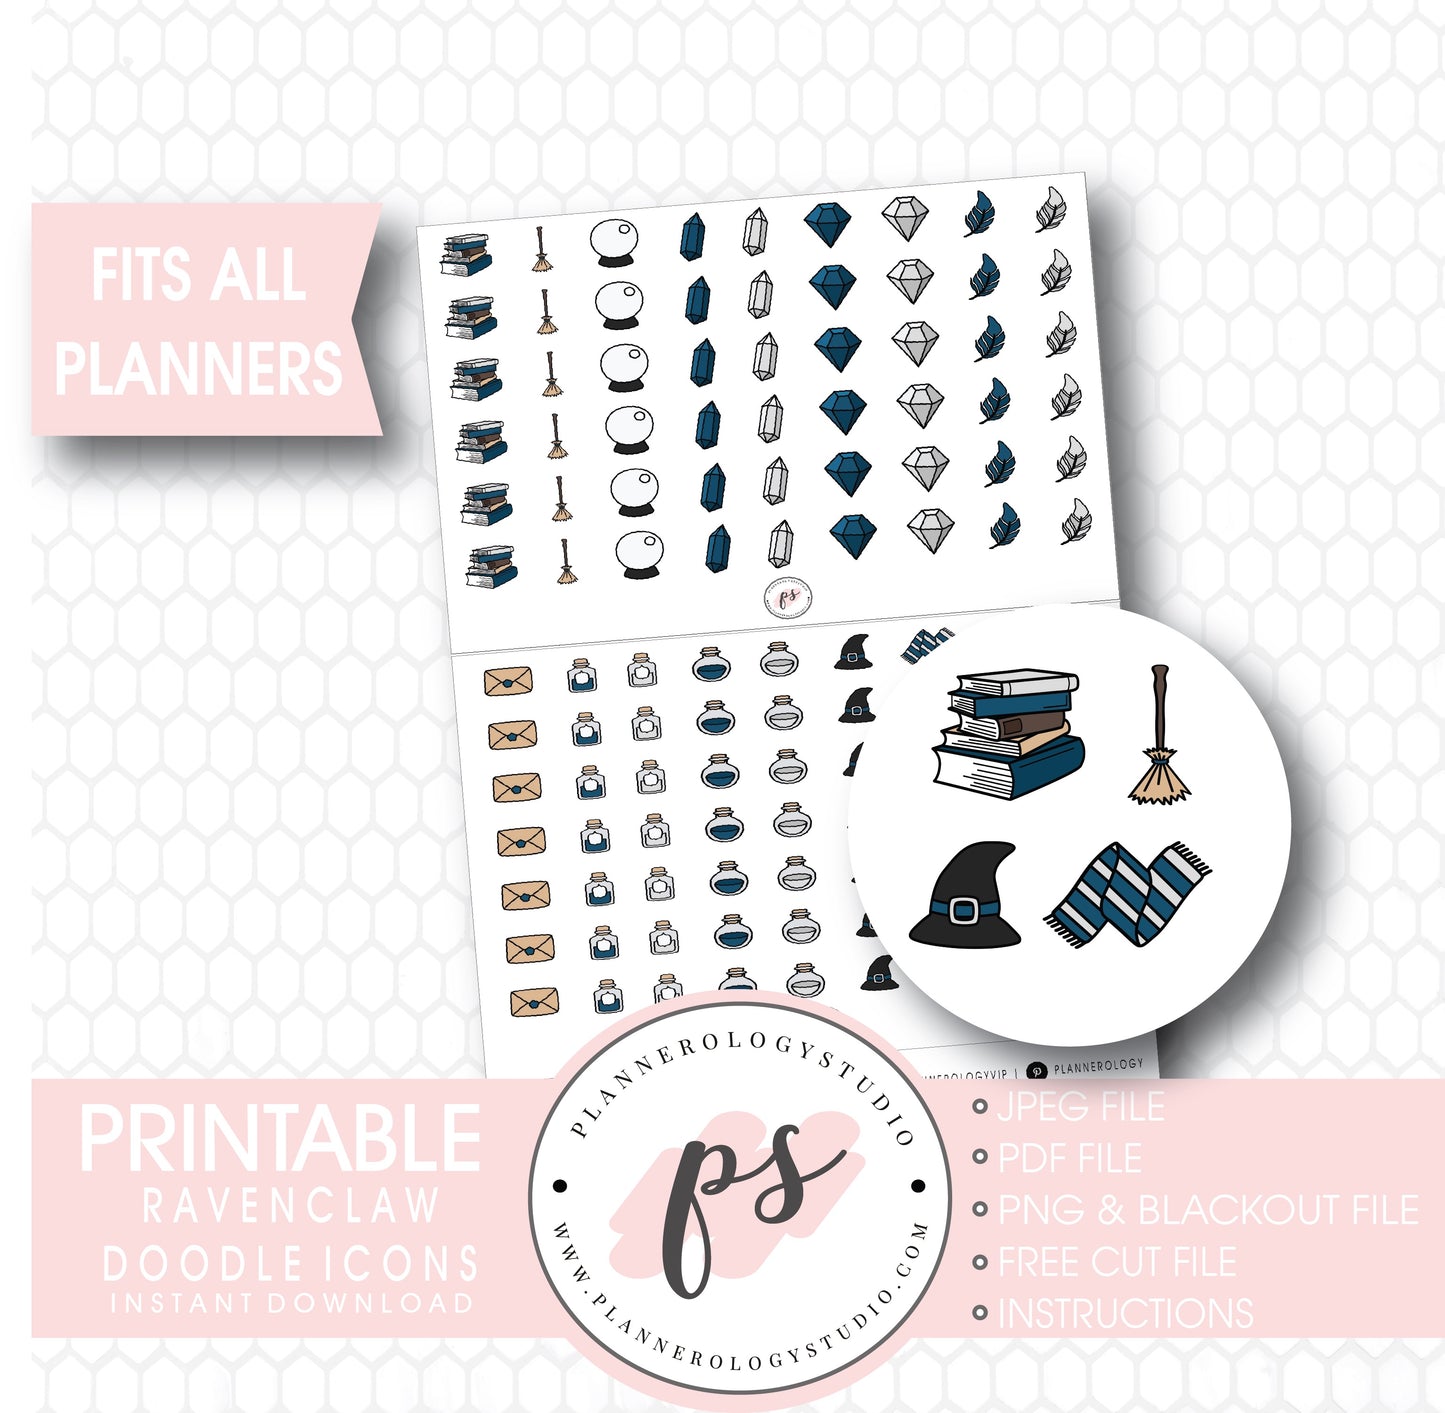 Wizards & Magic (Harry Potter Ravenclaw House) Doodle Icons Digital Printable Planner Stickers